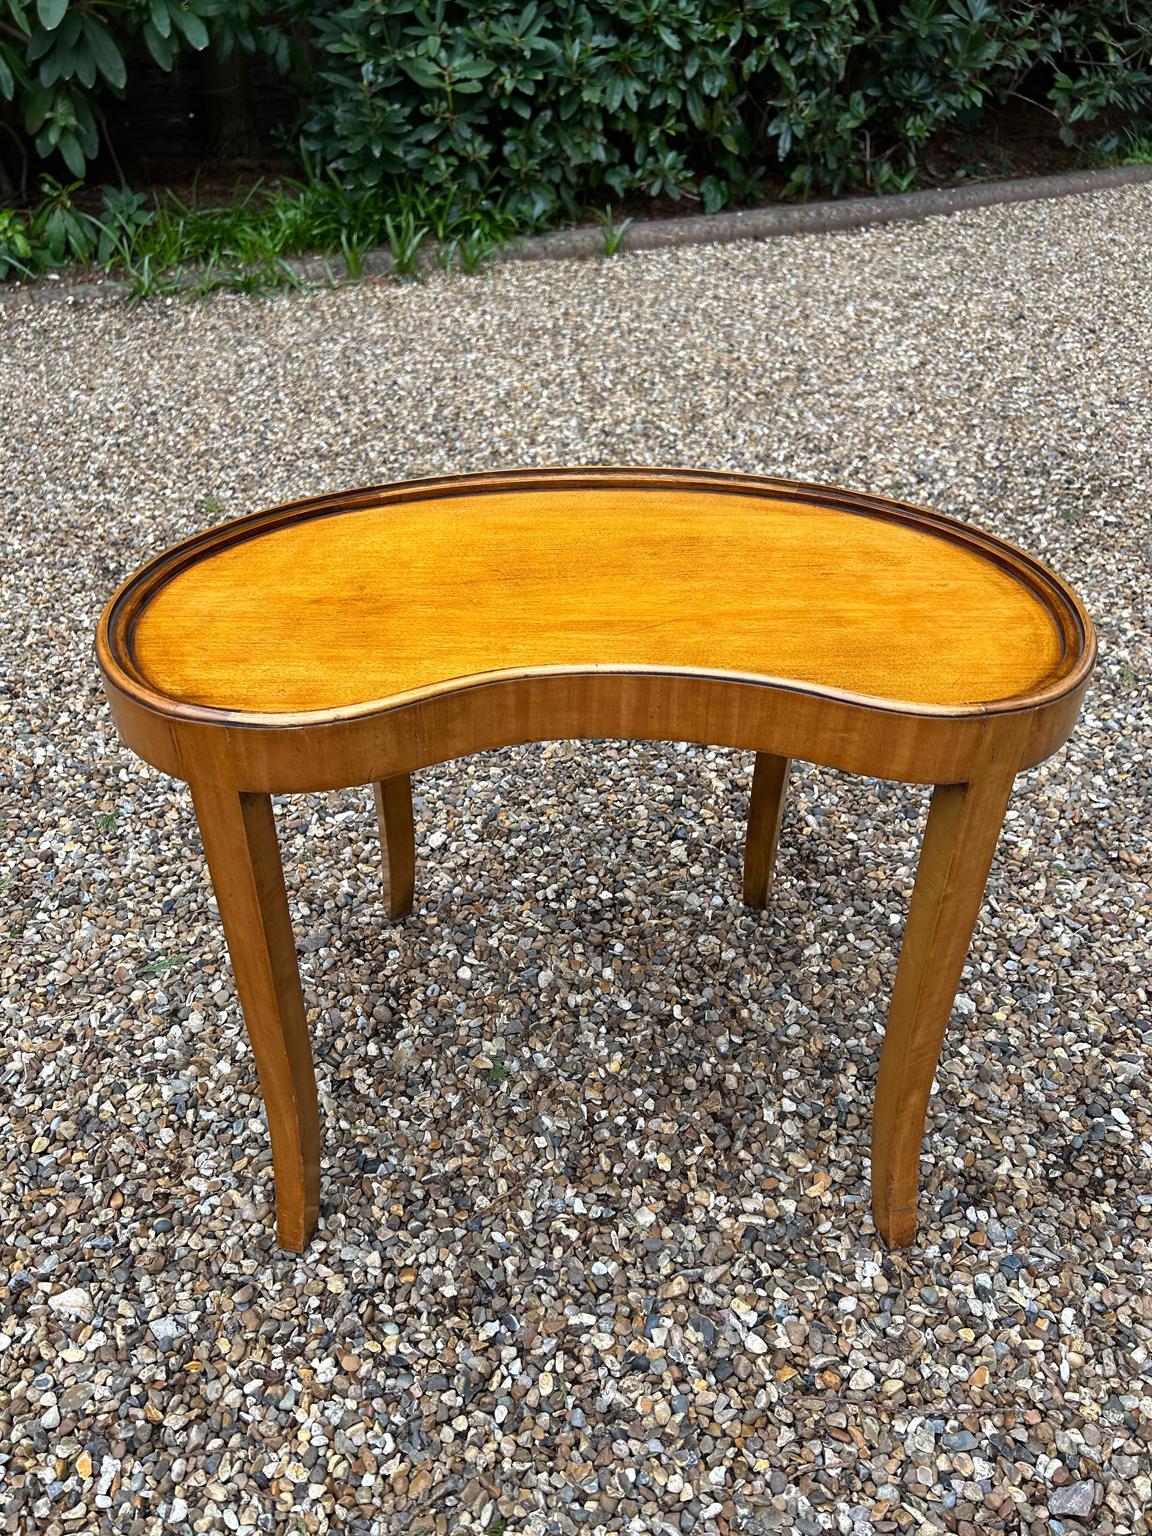 19th Century Inlaid Satinwood Tray on (Stand made later) For Sale 5